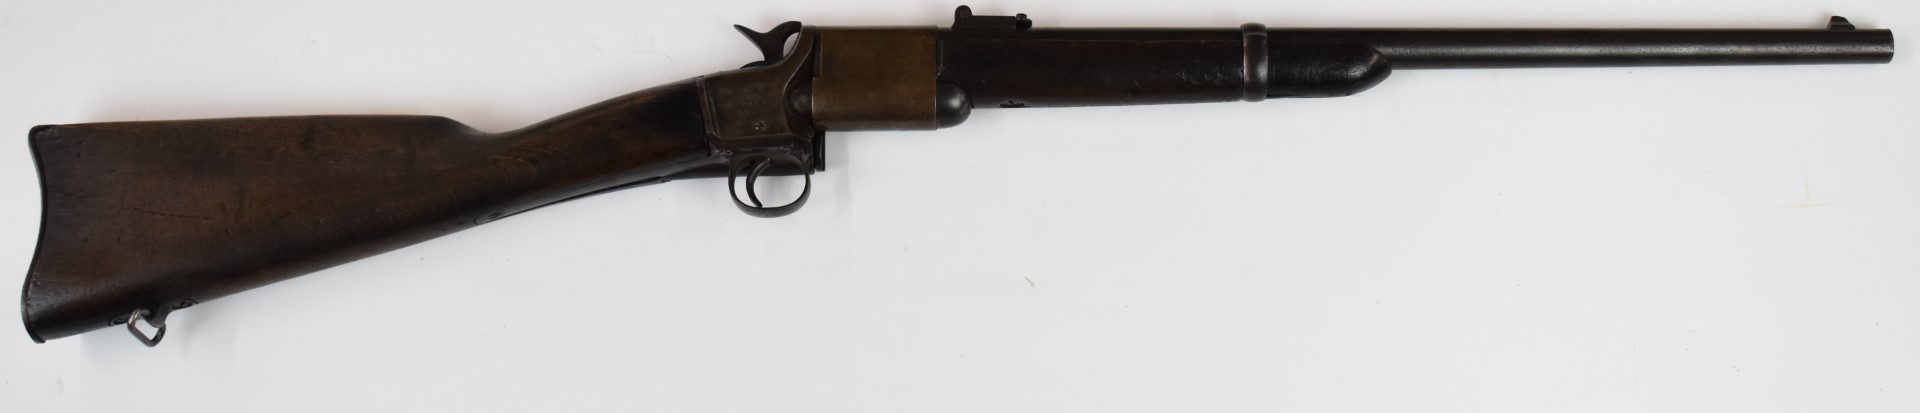 Meriden Manufacturing Co for Charles Parker of Triplett & Scott .50 twist-action repeating carbine - Image 2 of 7